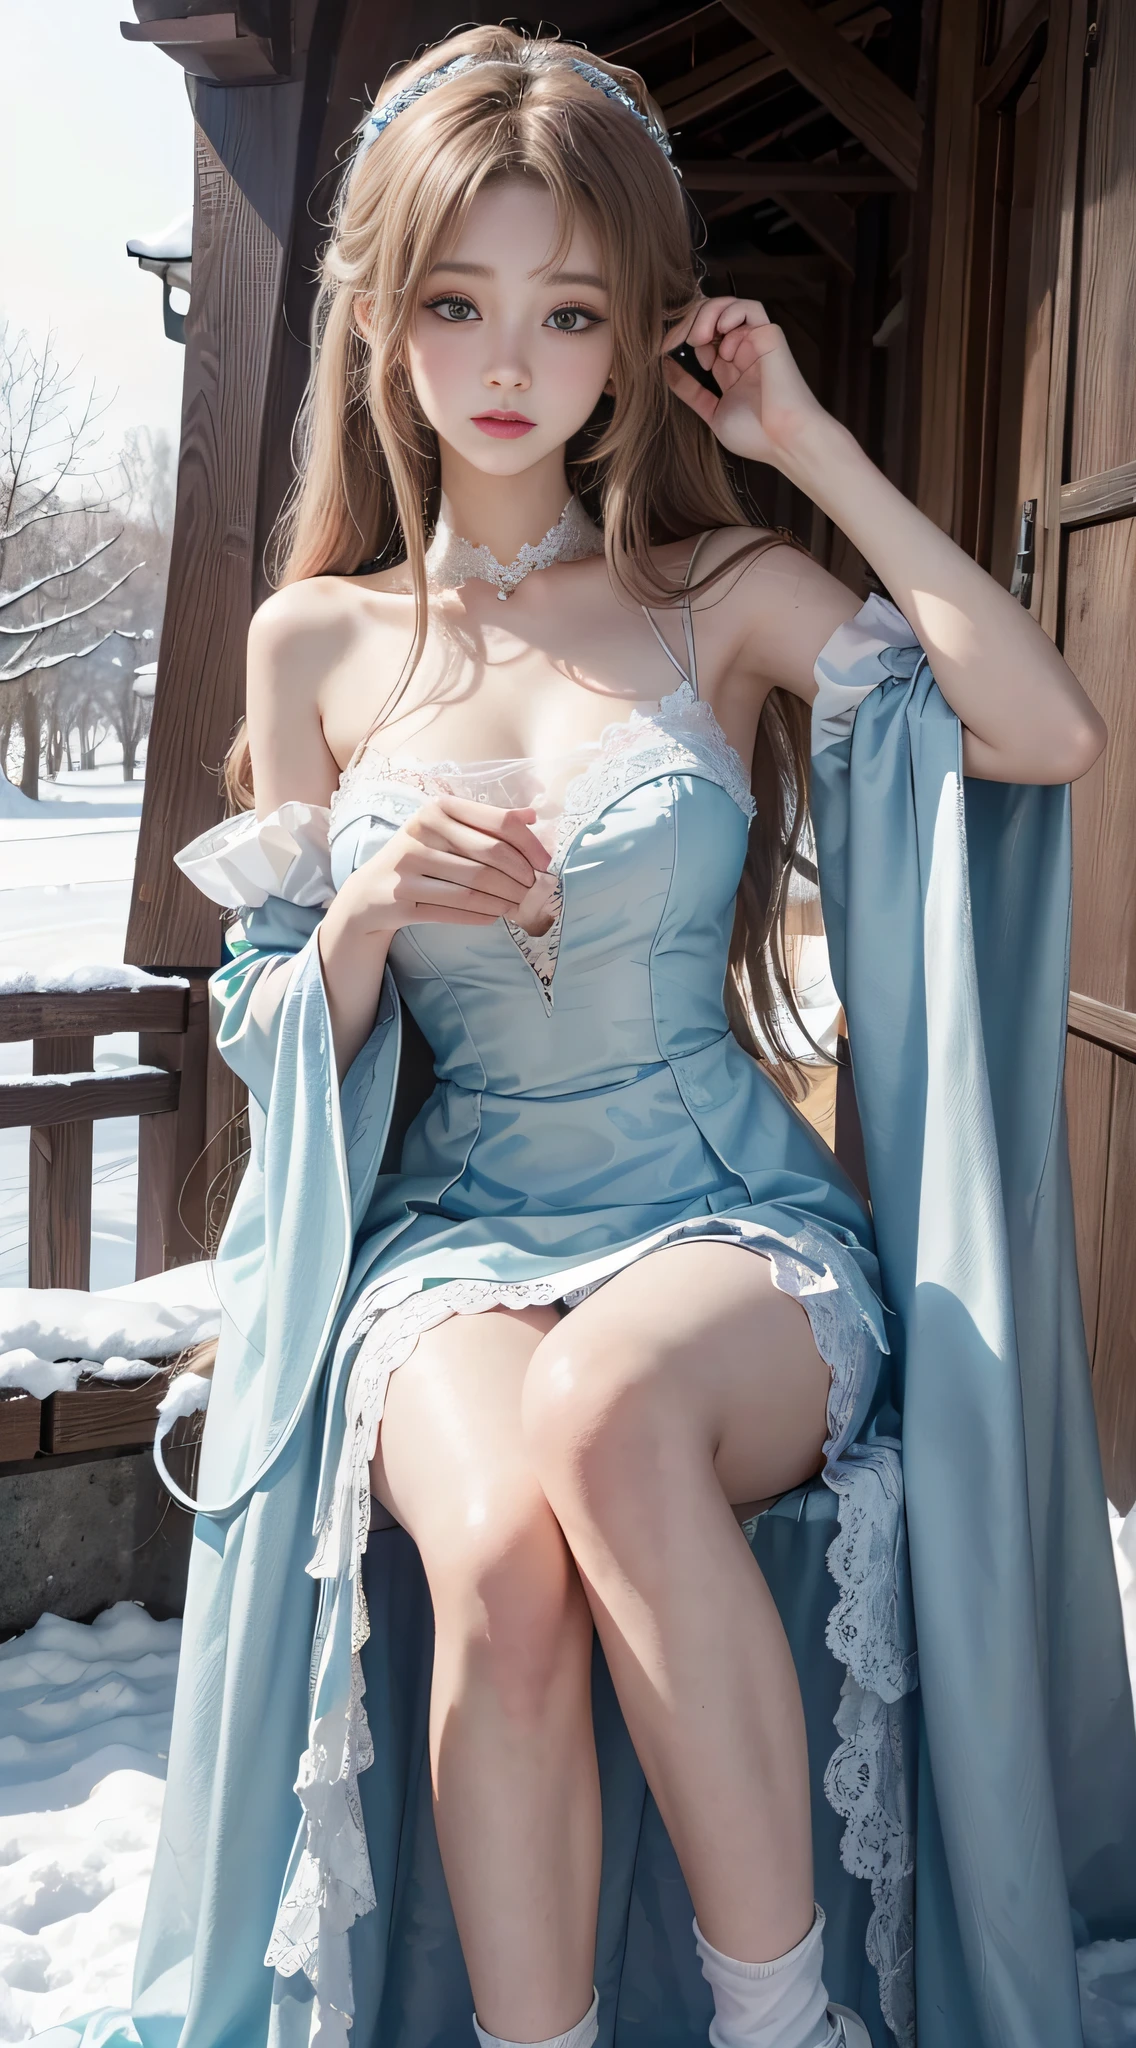 （8K， RAW photos， best qualtiy， tmasterpiece：1.2），（realisticlying， photograph realistic：1.4)，Hide your face with sadness，
Lolita costume，Lace， Aerith Gainsborough， The upper part of the body， undergarments，exposed bare shoulders， do lado de fora， (outside，Covered with snow，Cloak，) high high quality， Adobe Lightroom， highdetailskin， looking at viewert，